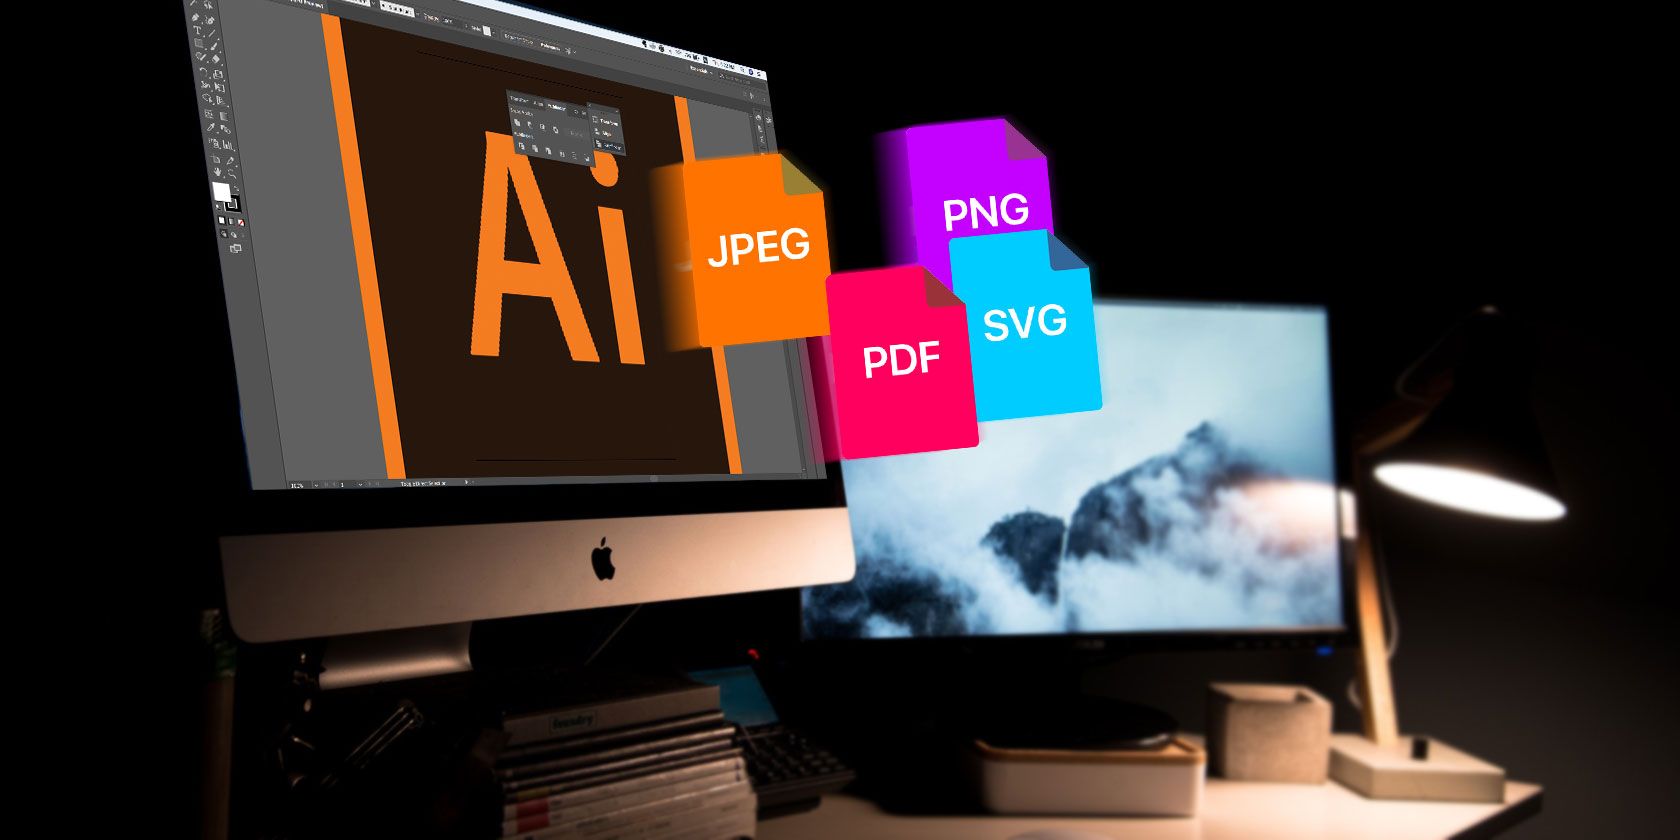 How to Save Adobe Illustrator Files in Other Formats: JPEG, PNG, SVG